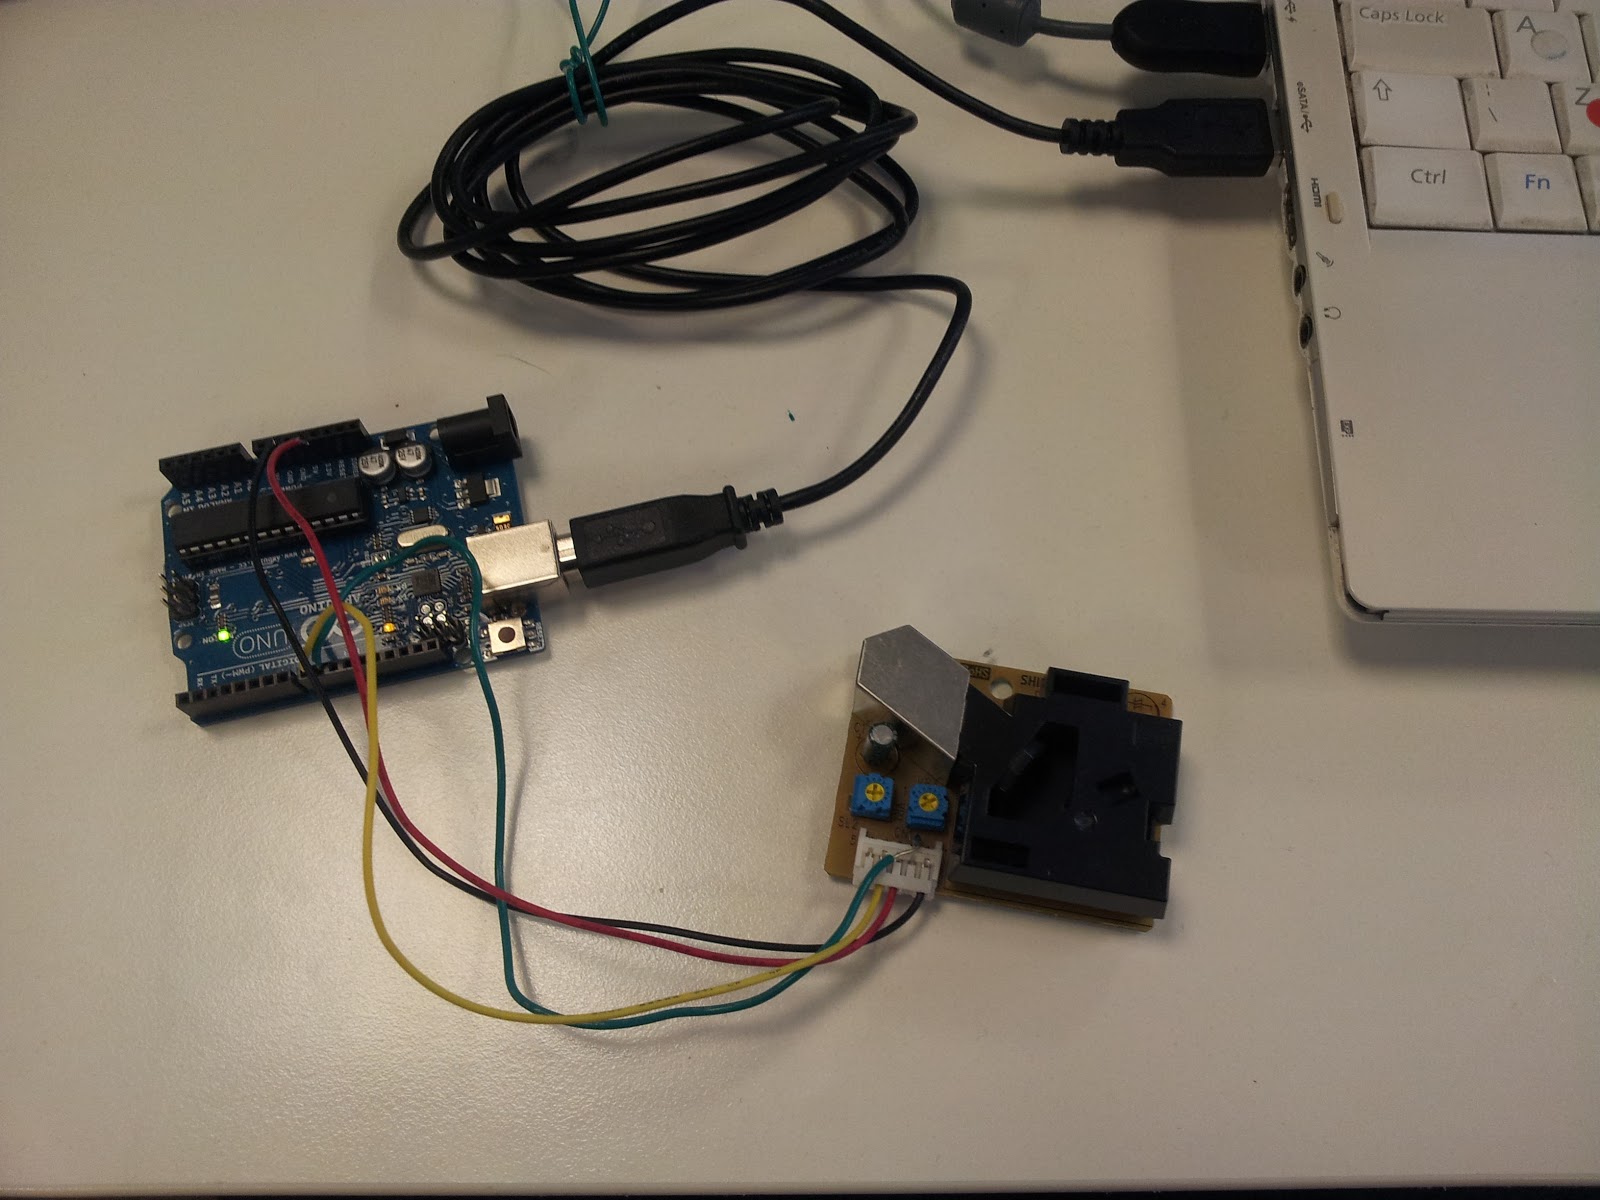 Measuring Air Quality on Opensensors